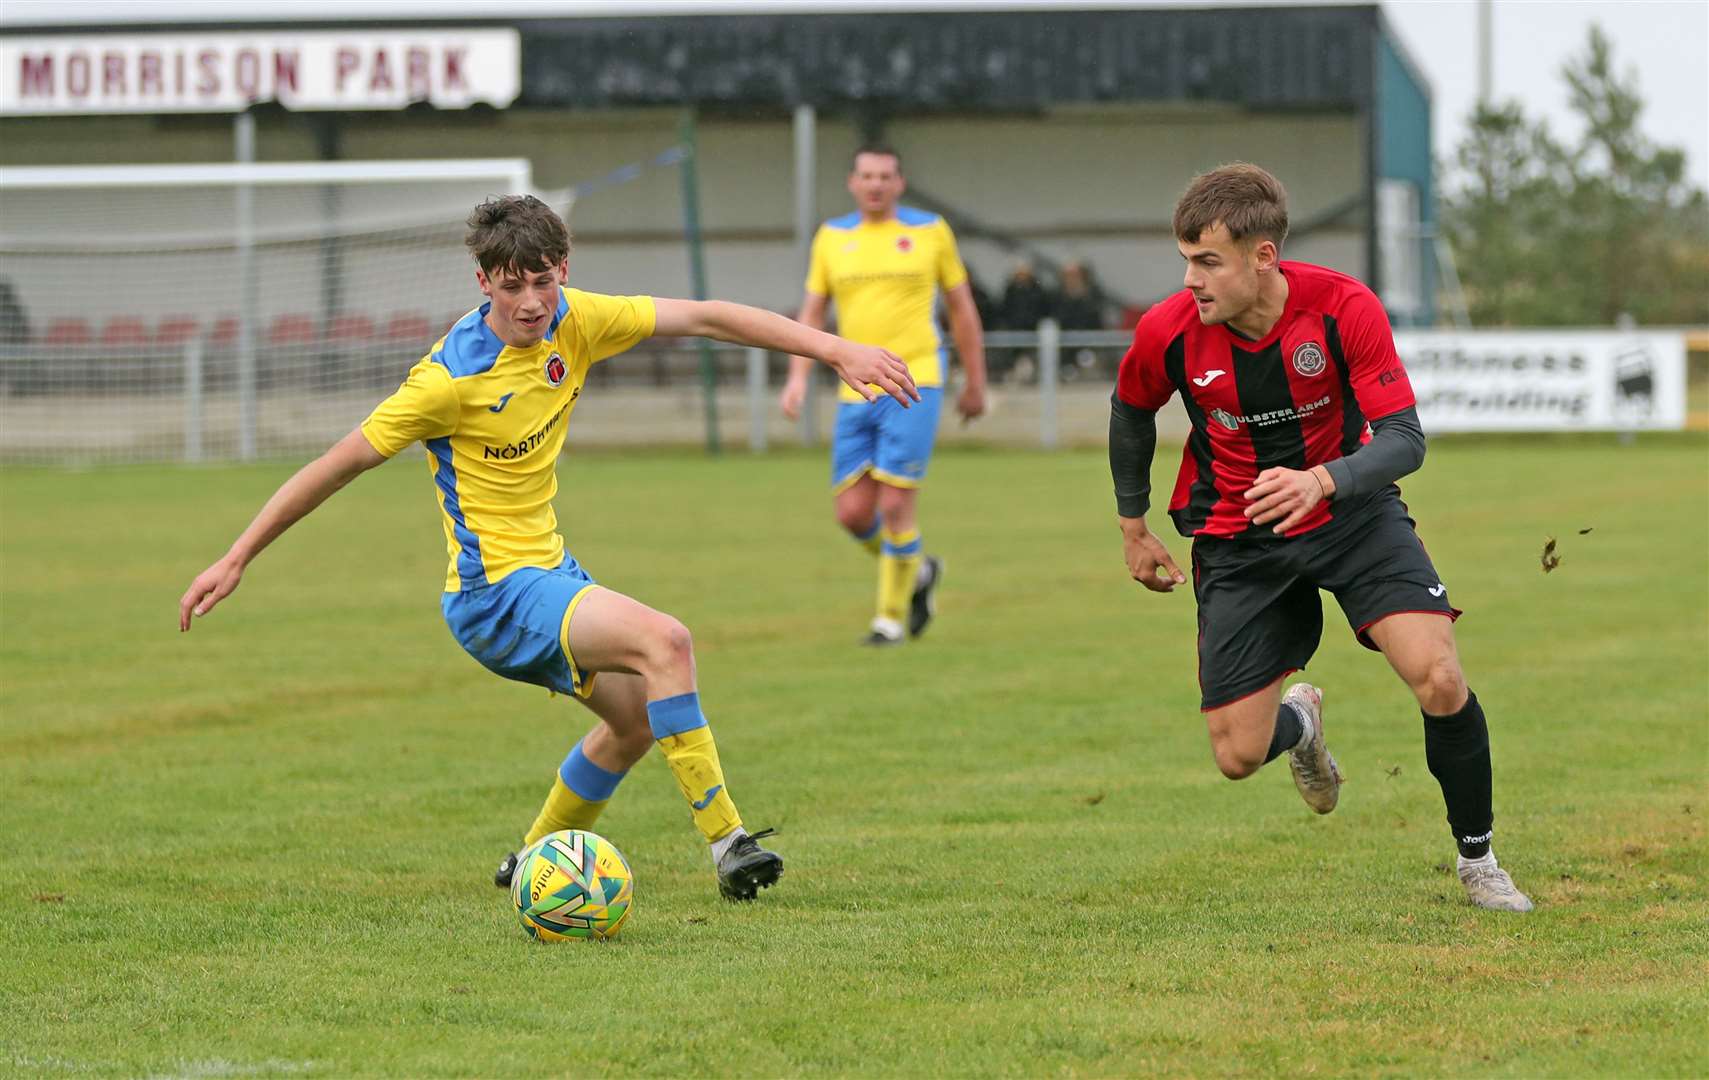 Halkirk United's Jonah Martens in action against Erlend Risbridger of Orkney at Morrison Park in October. The Anglers were due to host Inverness Athletic on Saturday but the game was called off on Friday evening. Picture: James Gunn